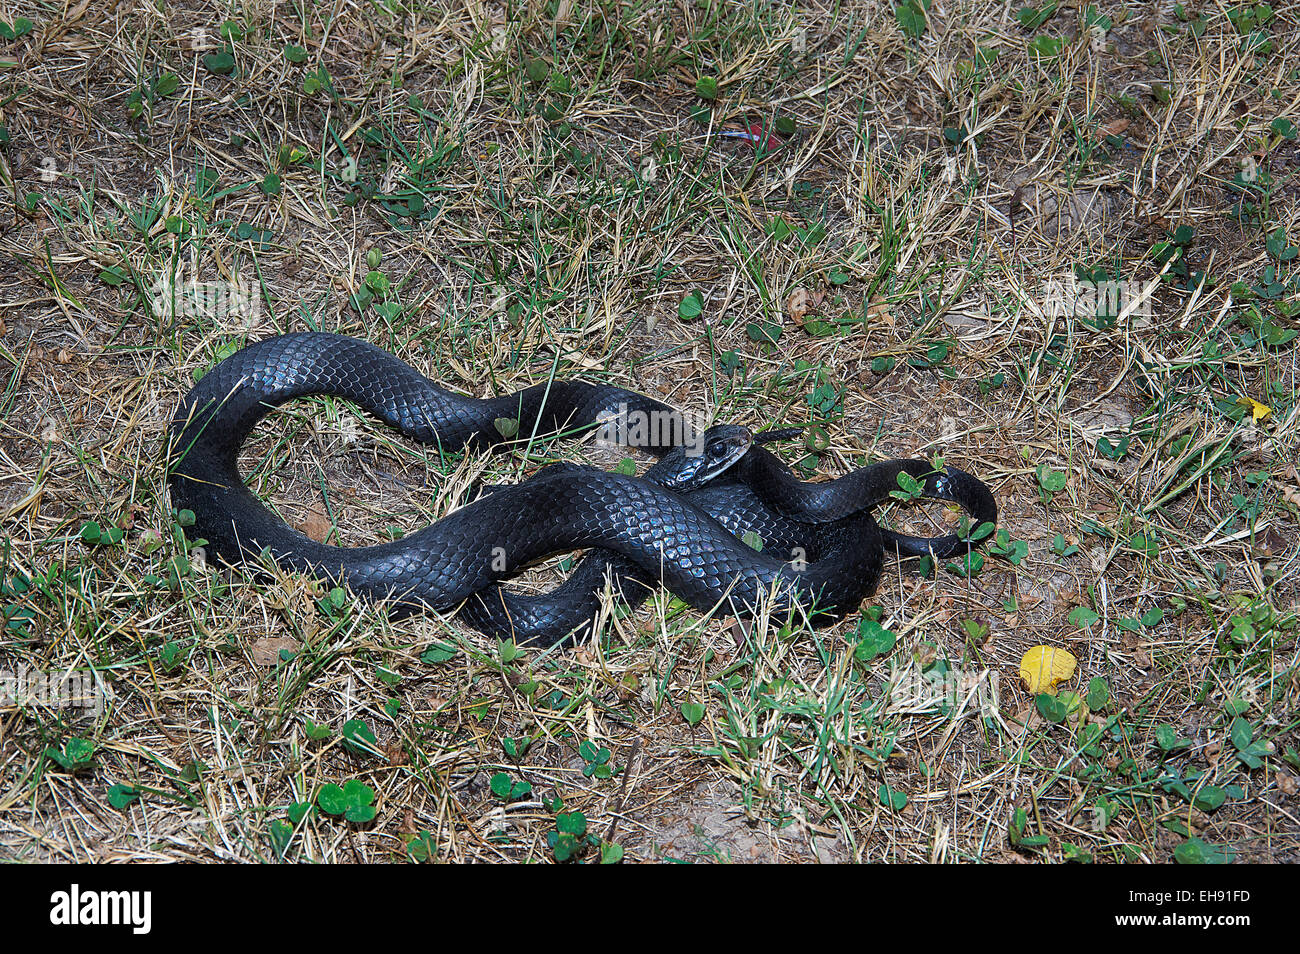 Northern Black Racer, Coluber constrictor constrictor, snake, North American Snake, reptile,  colubrid Stock Photo